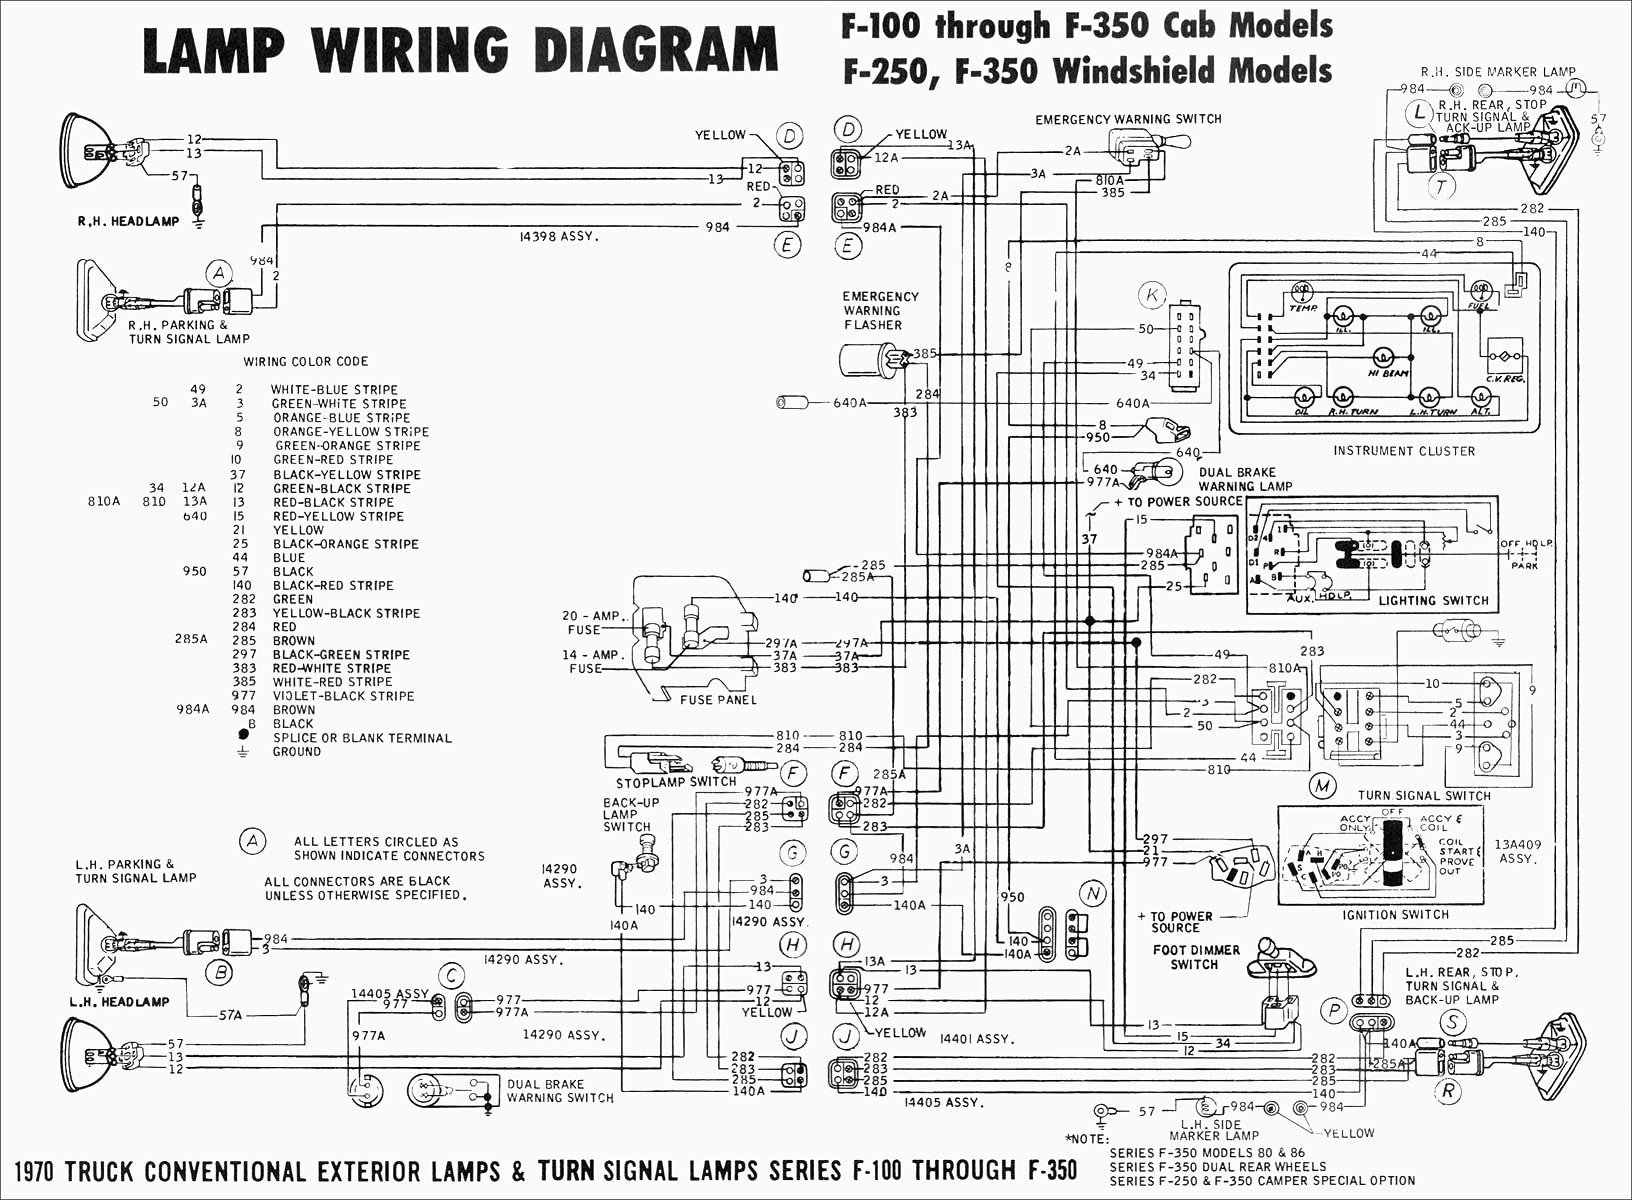 Wiring Diagram for Brake Light Switch Refrence My Brake Lights Dont Work I Changed the Switch